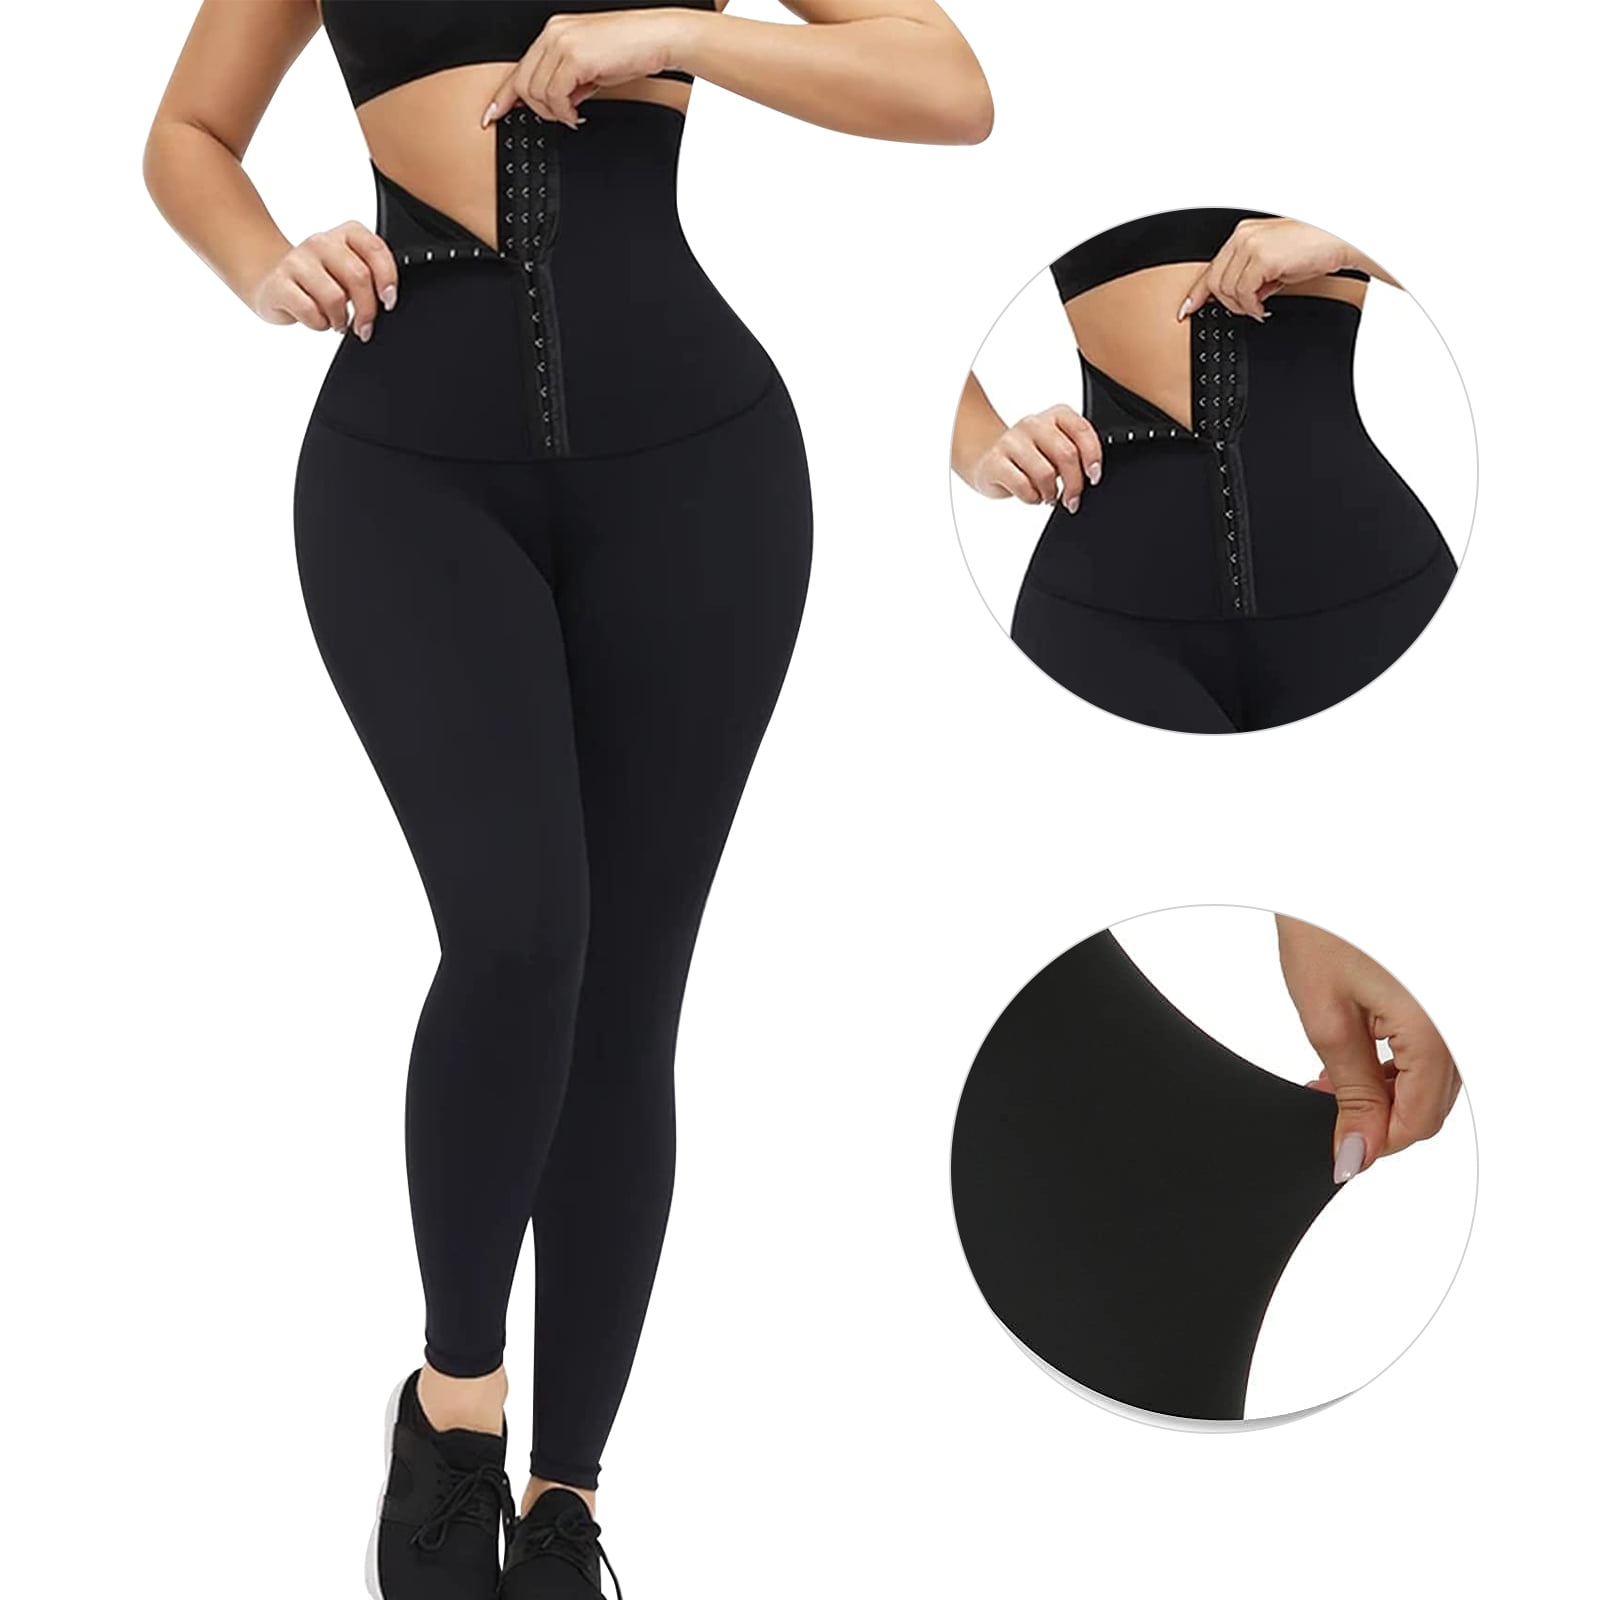 High Waist Yoga Pants for Women Seamless Scrunch Booty Leggings Butt Lifting Stretchy Tights Squat Proof Booty Pants 